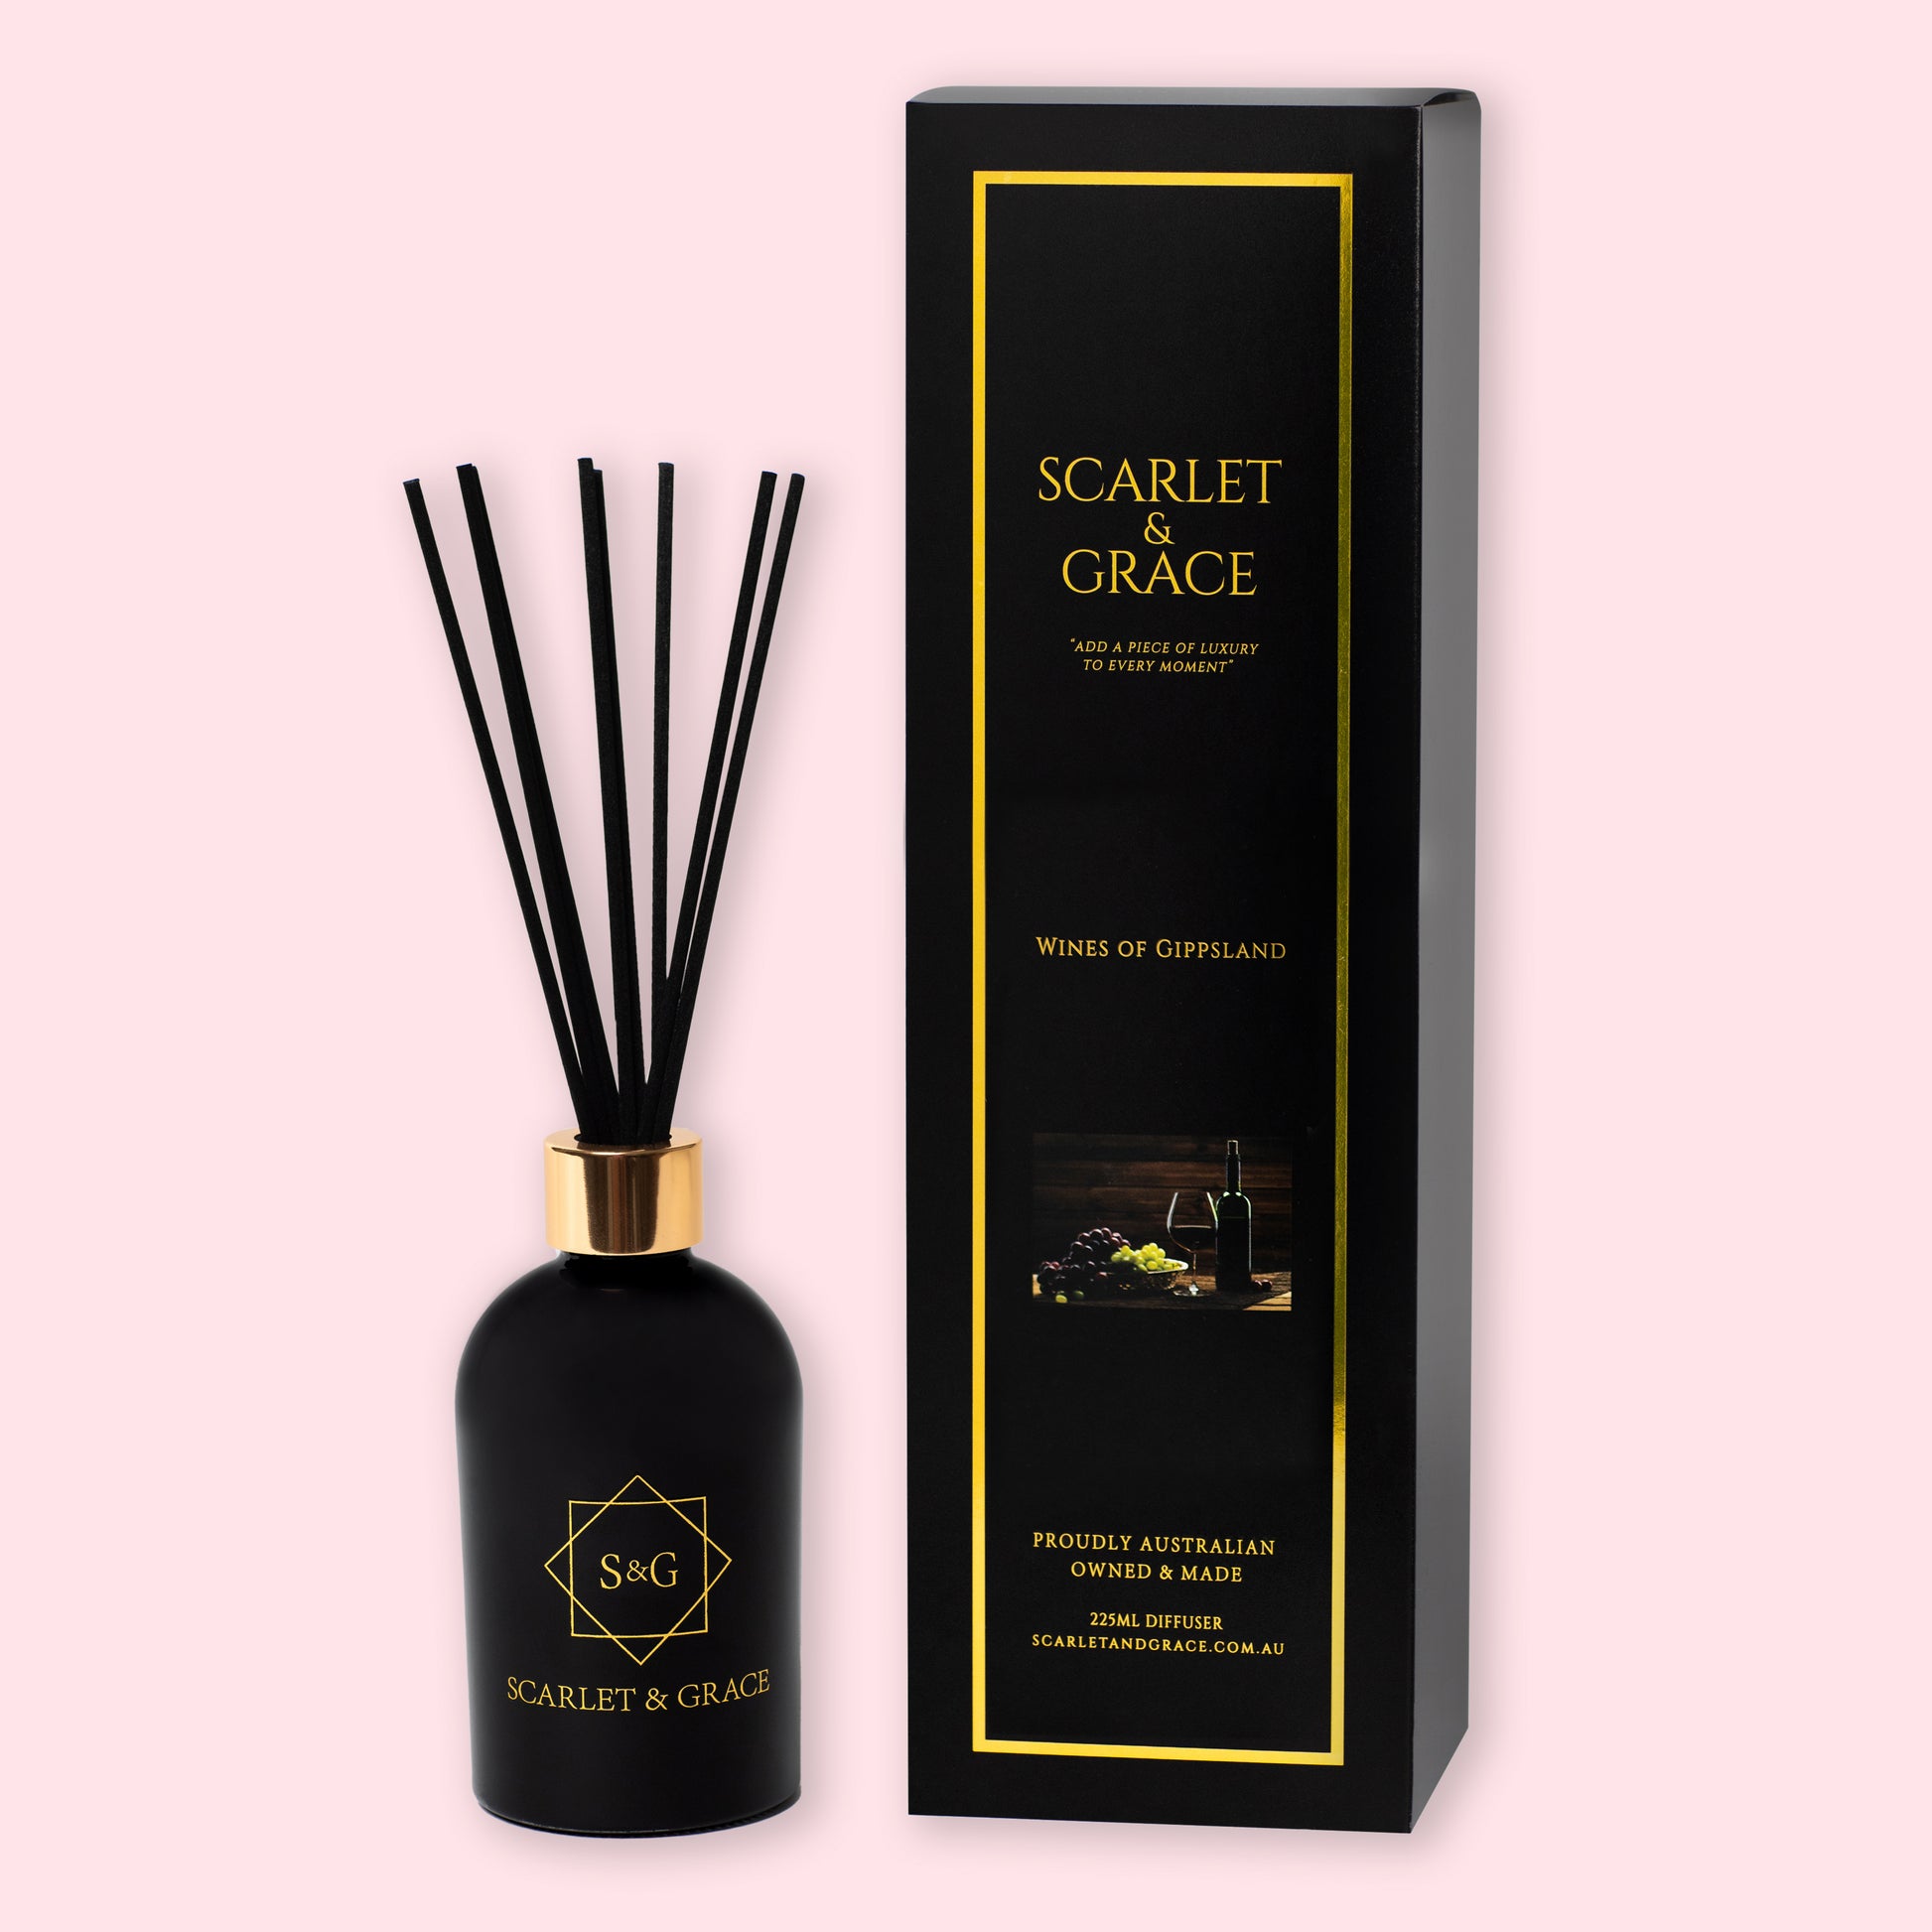 Wines of Gippsland - 225ml Reed Diffuser - Scarlet & Grace